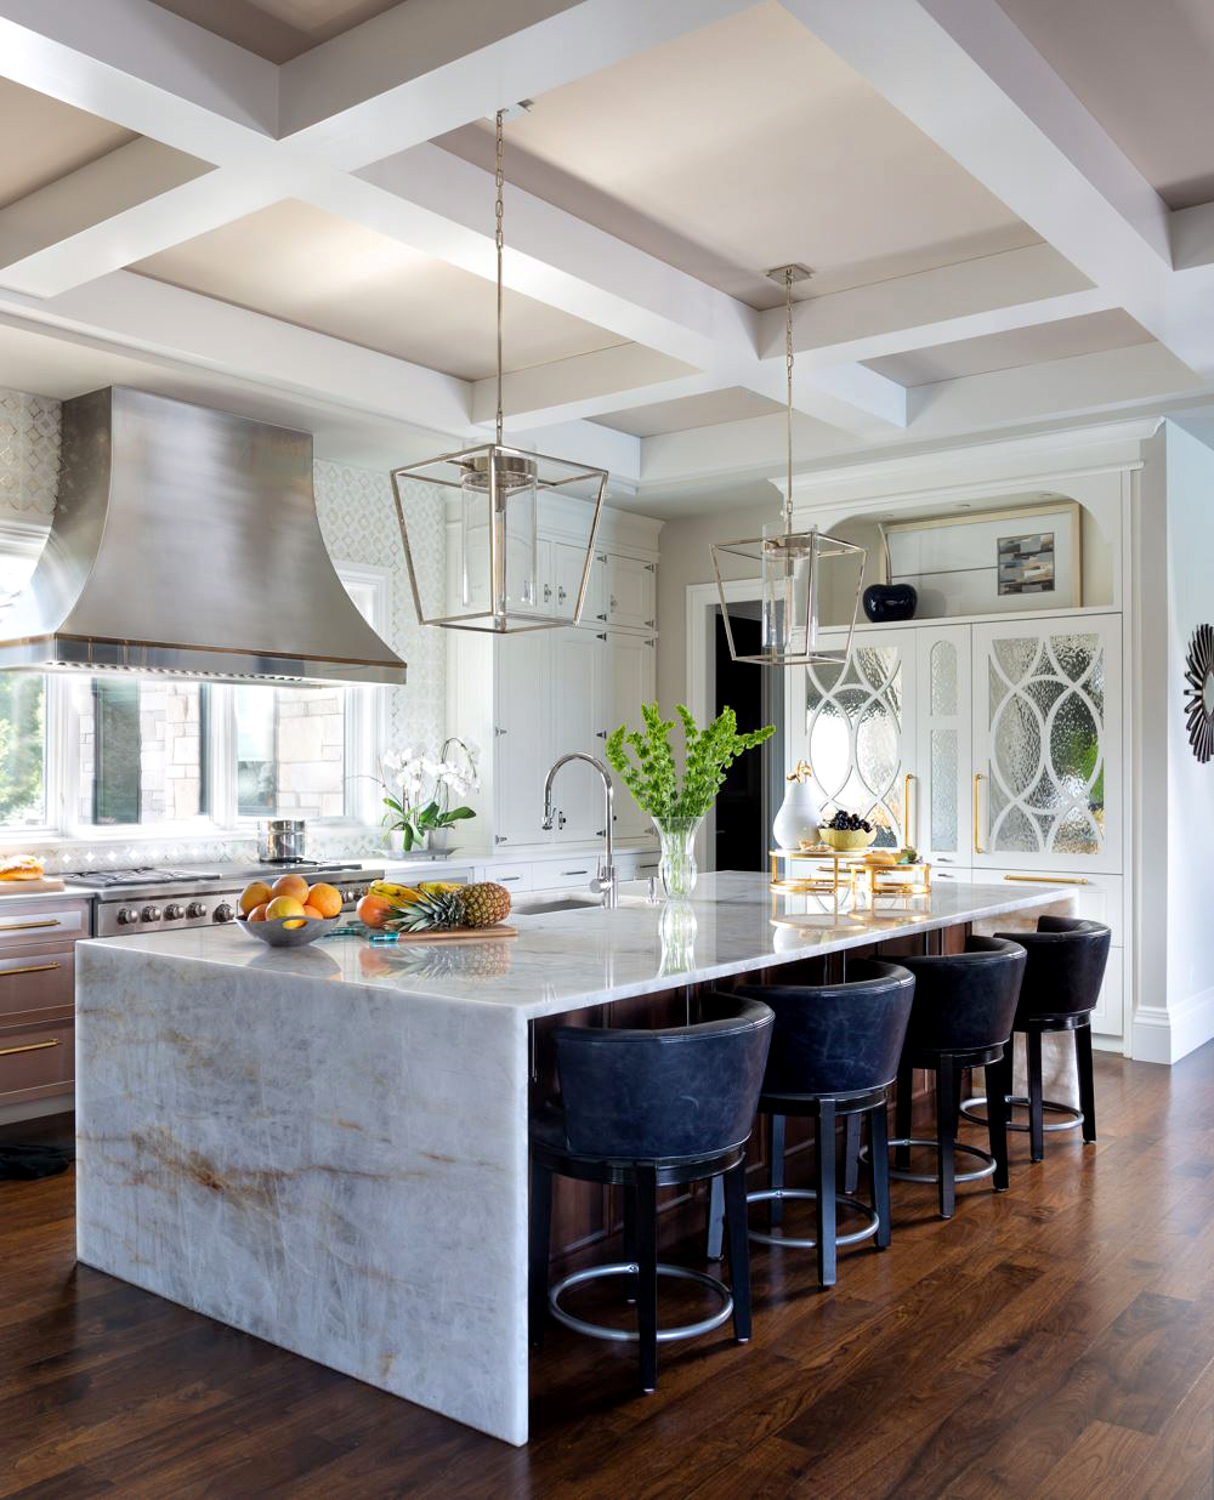 A large stone island sits amid a white kitchen with coffered ceilings and ornate woodworking. RED Winner.